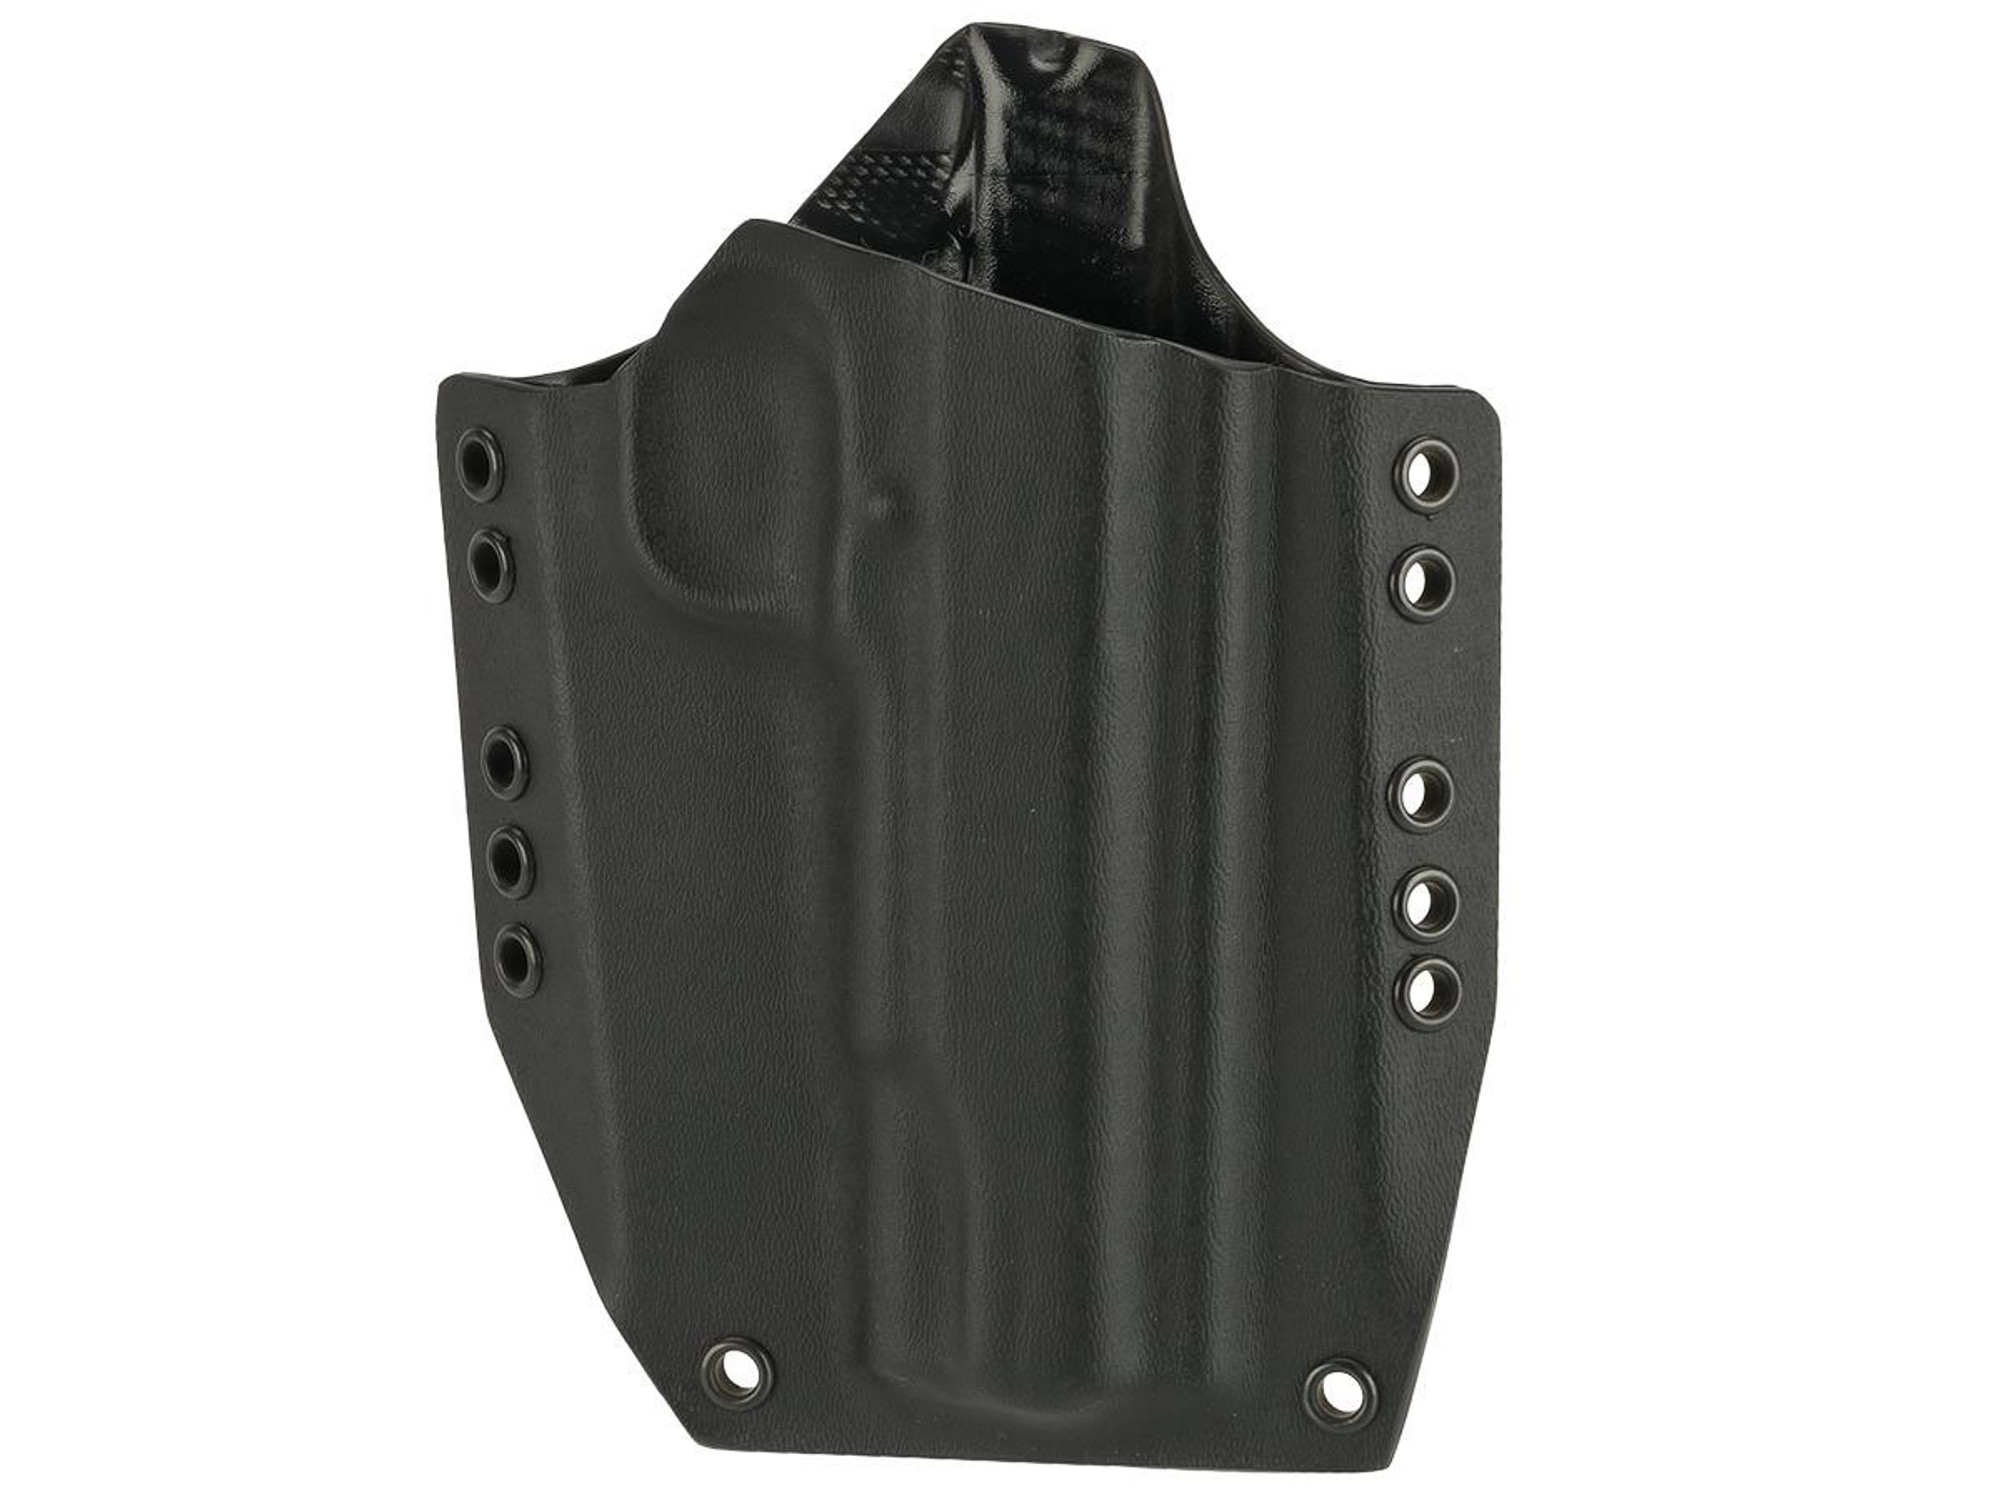 KAOS Concealment Kydex Belt / MOLLE Holster - WE TM KWA 1911 (Right / Black)